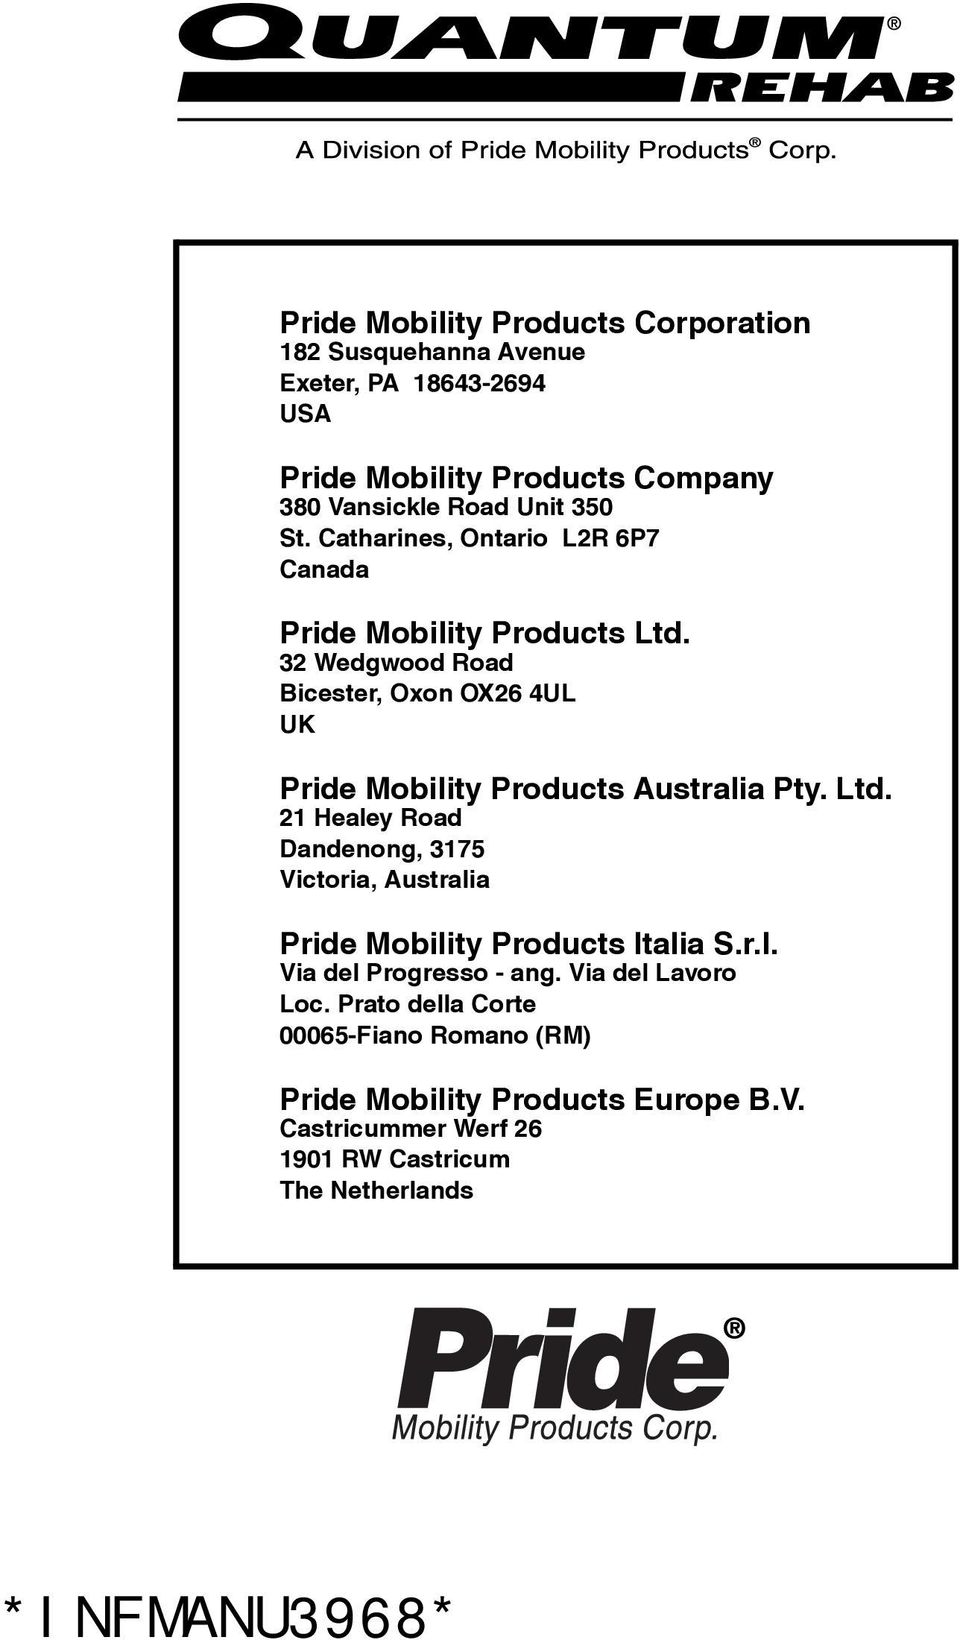 32 Wedgwood Road Bicester, Oxon OX26 4UL UK Pride Mobility Products Australia Pty. Ltd.